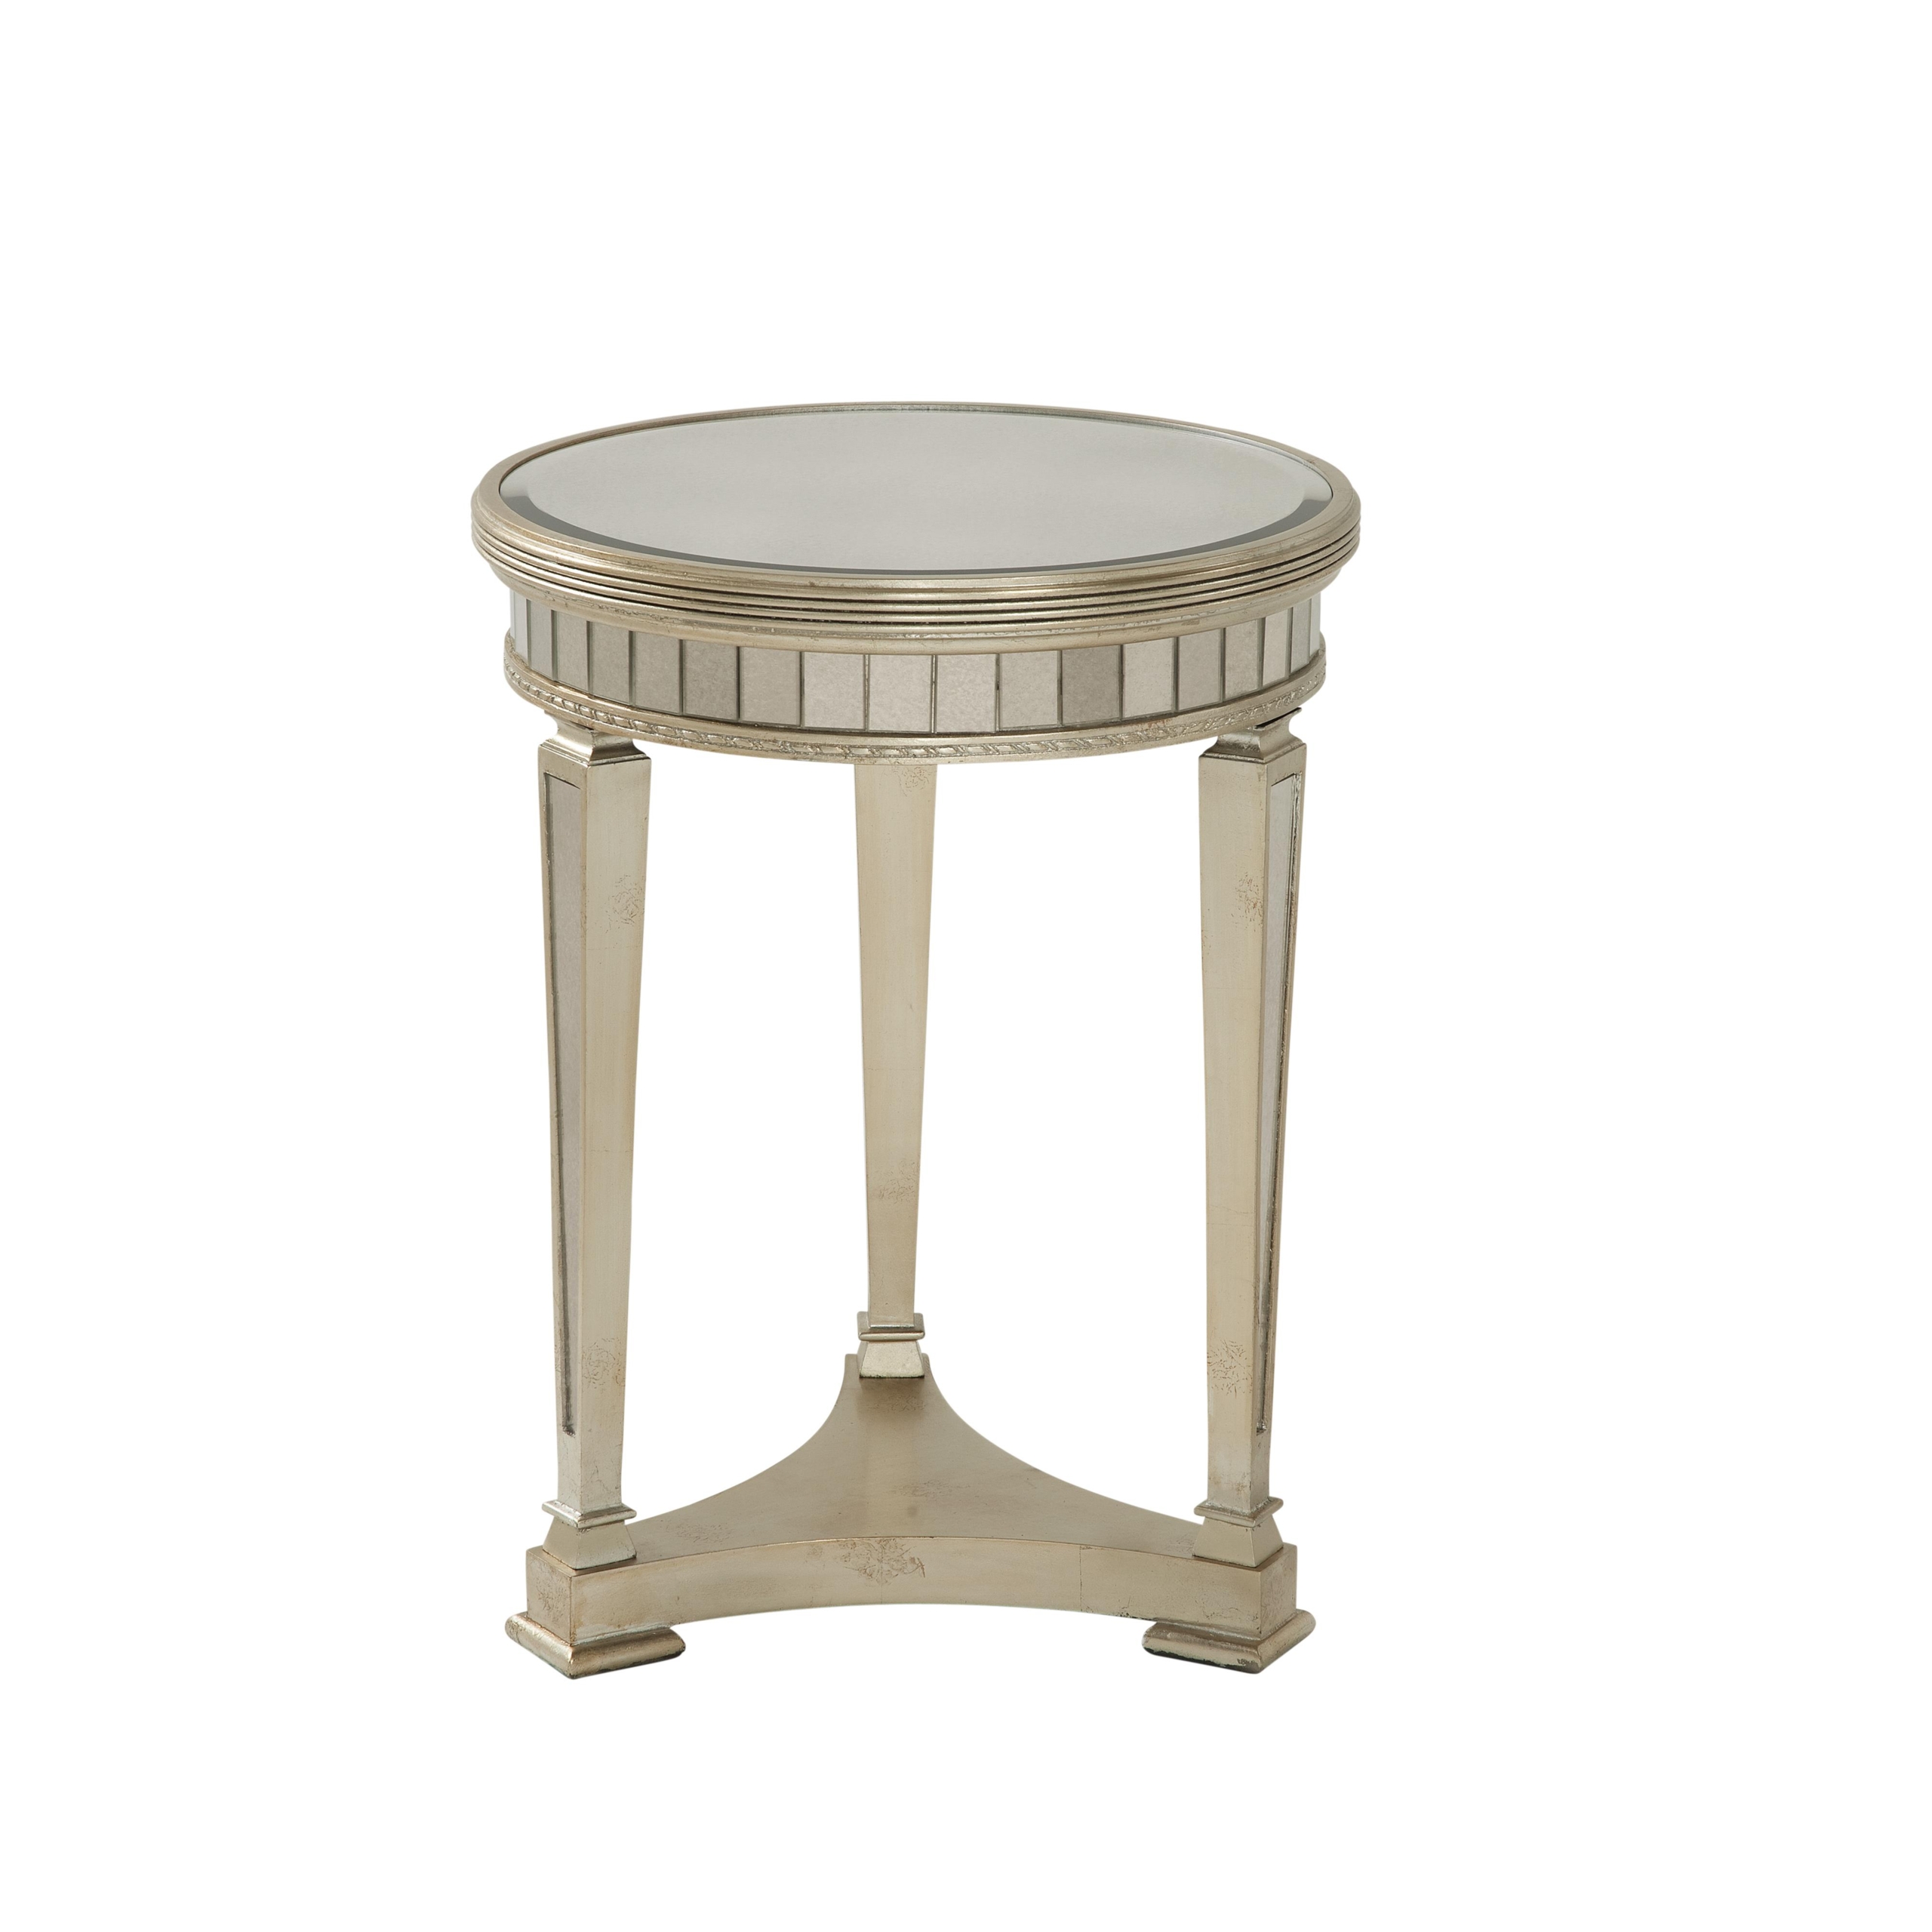 Mirrored round end table 2